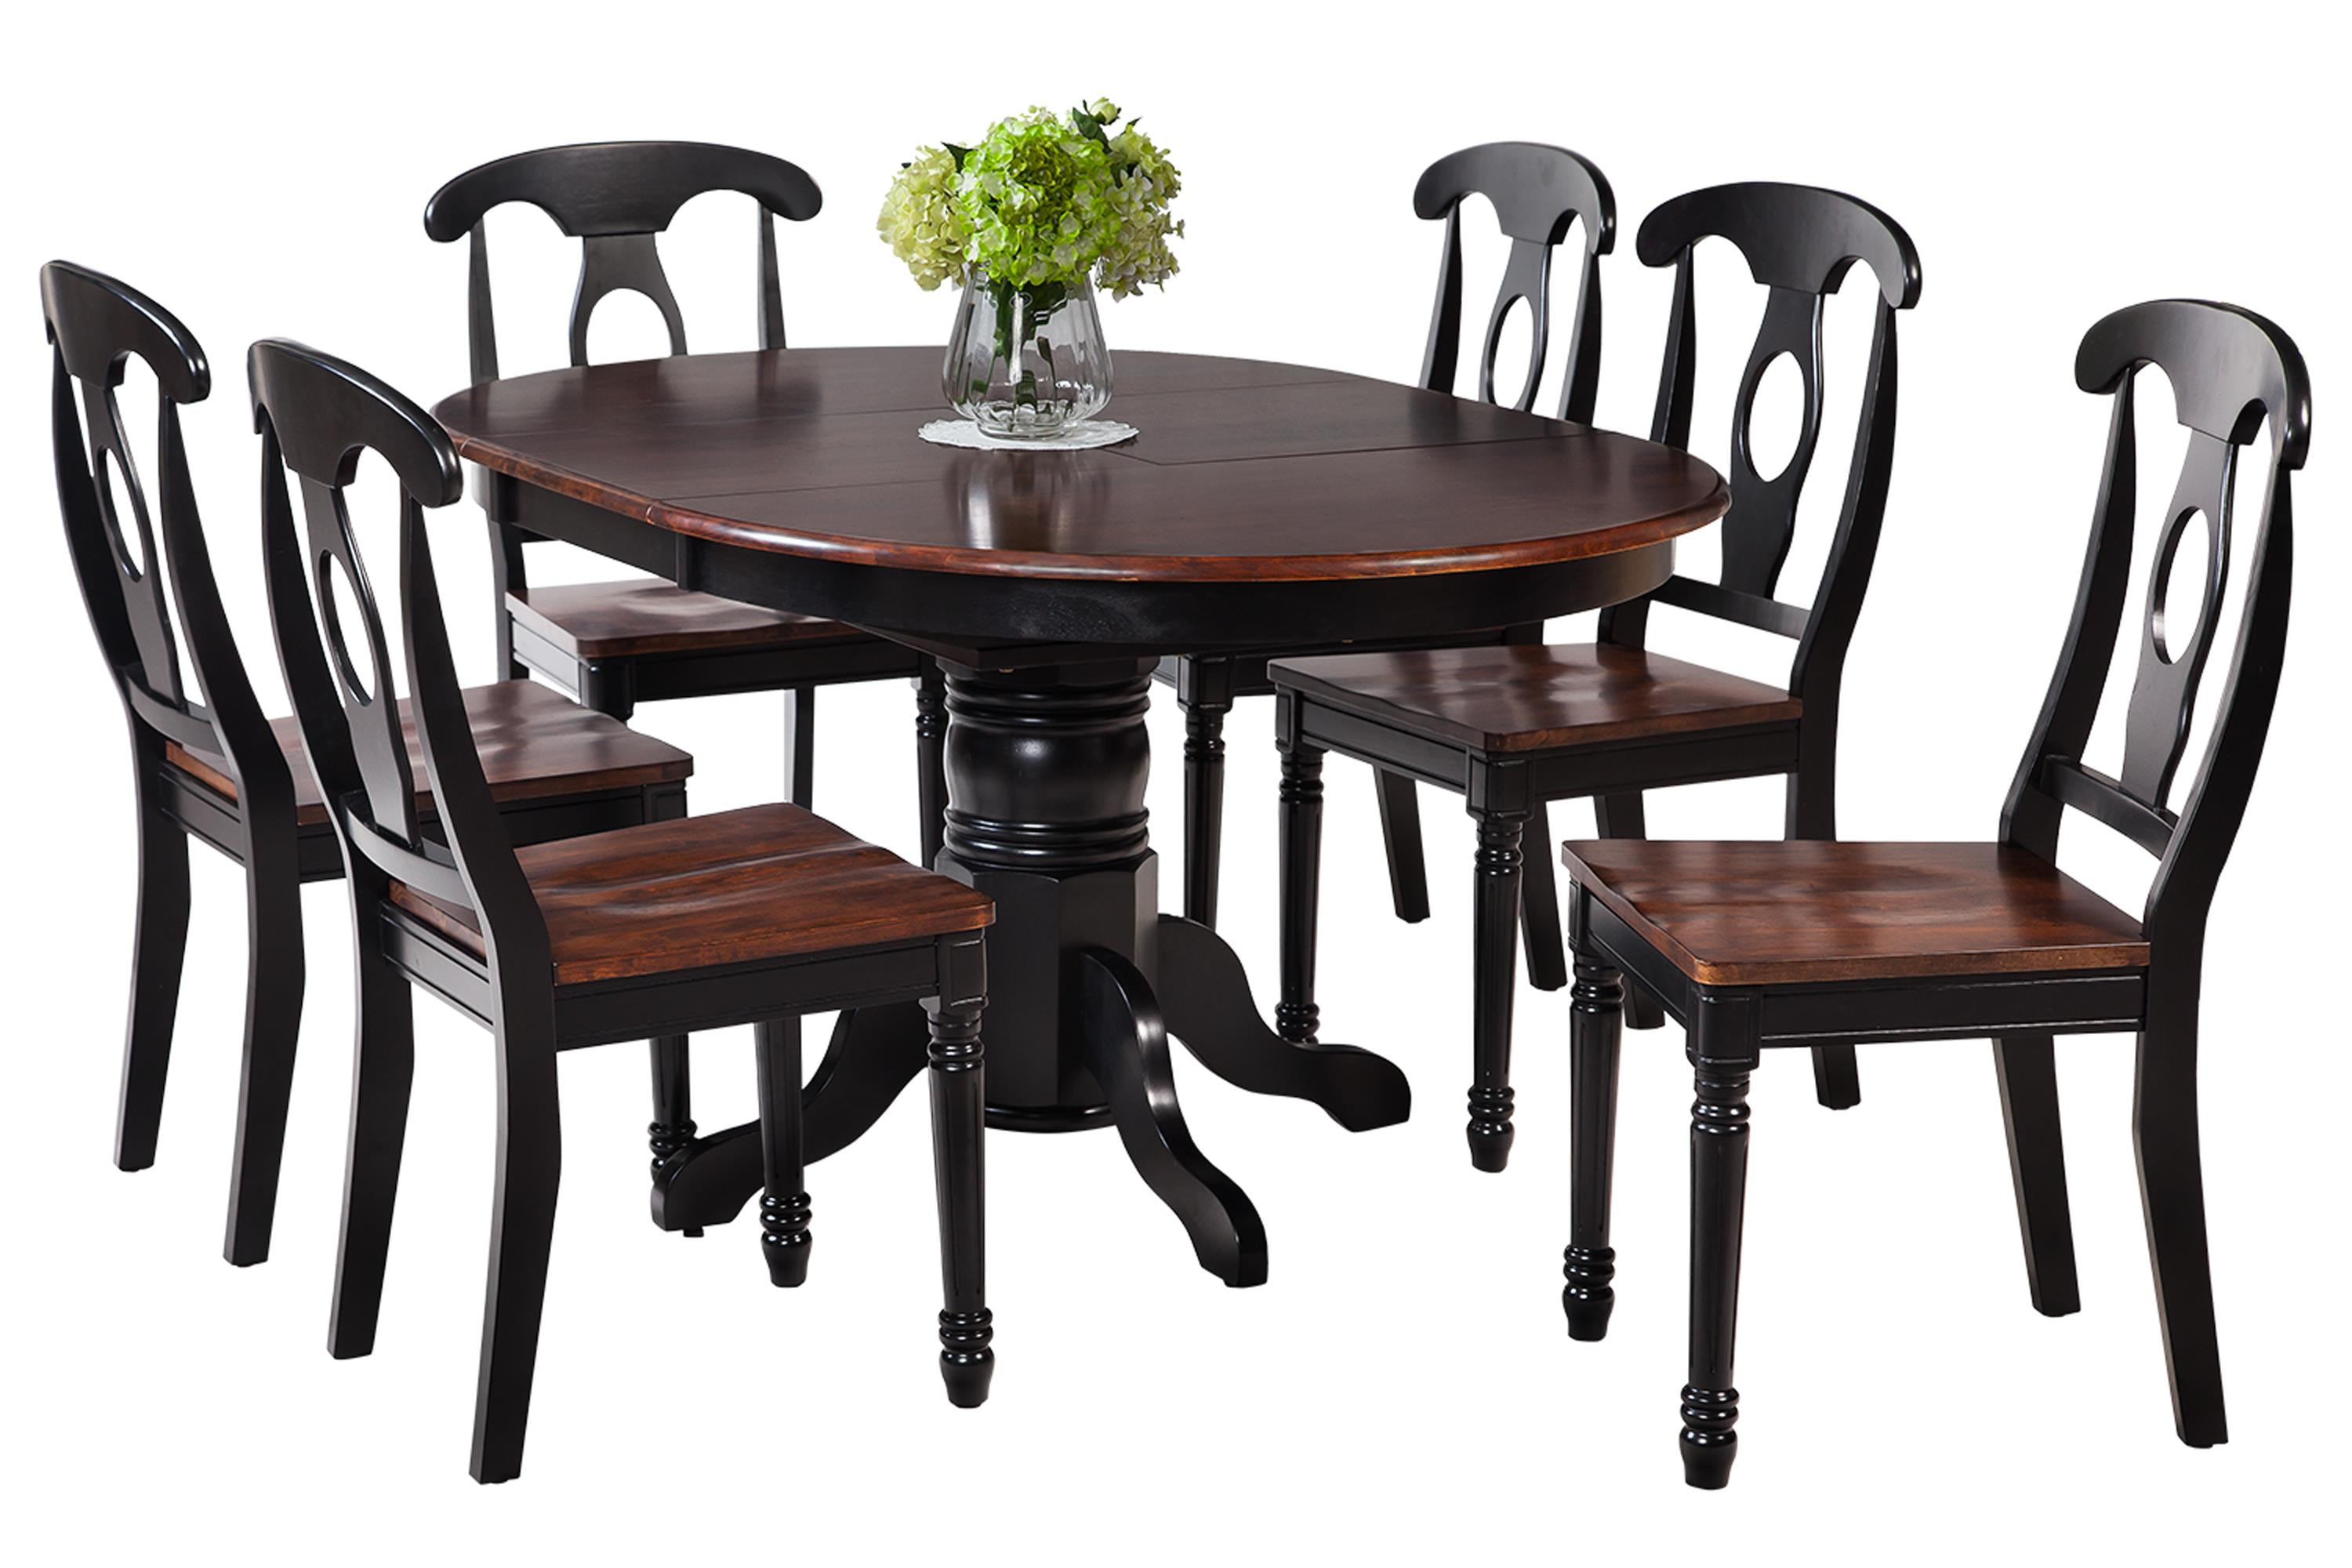 34+ Black And Cherry Dining Room Set Pics - buyerspowercordconnector